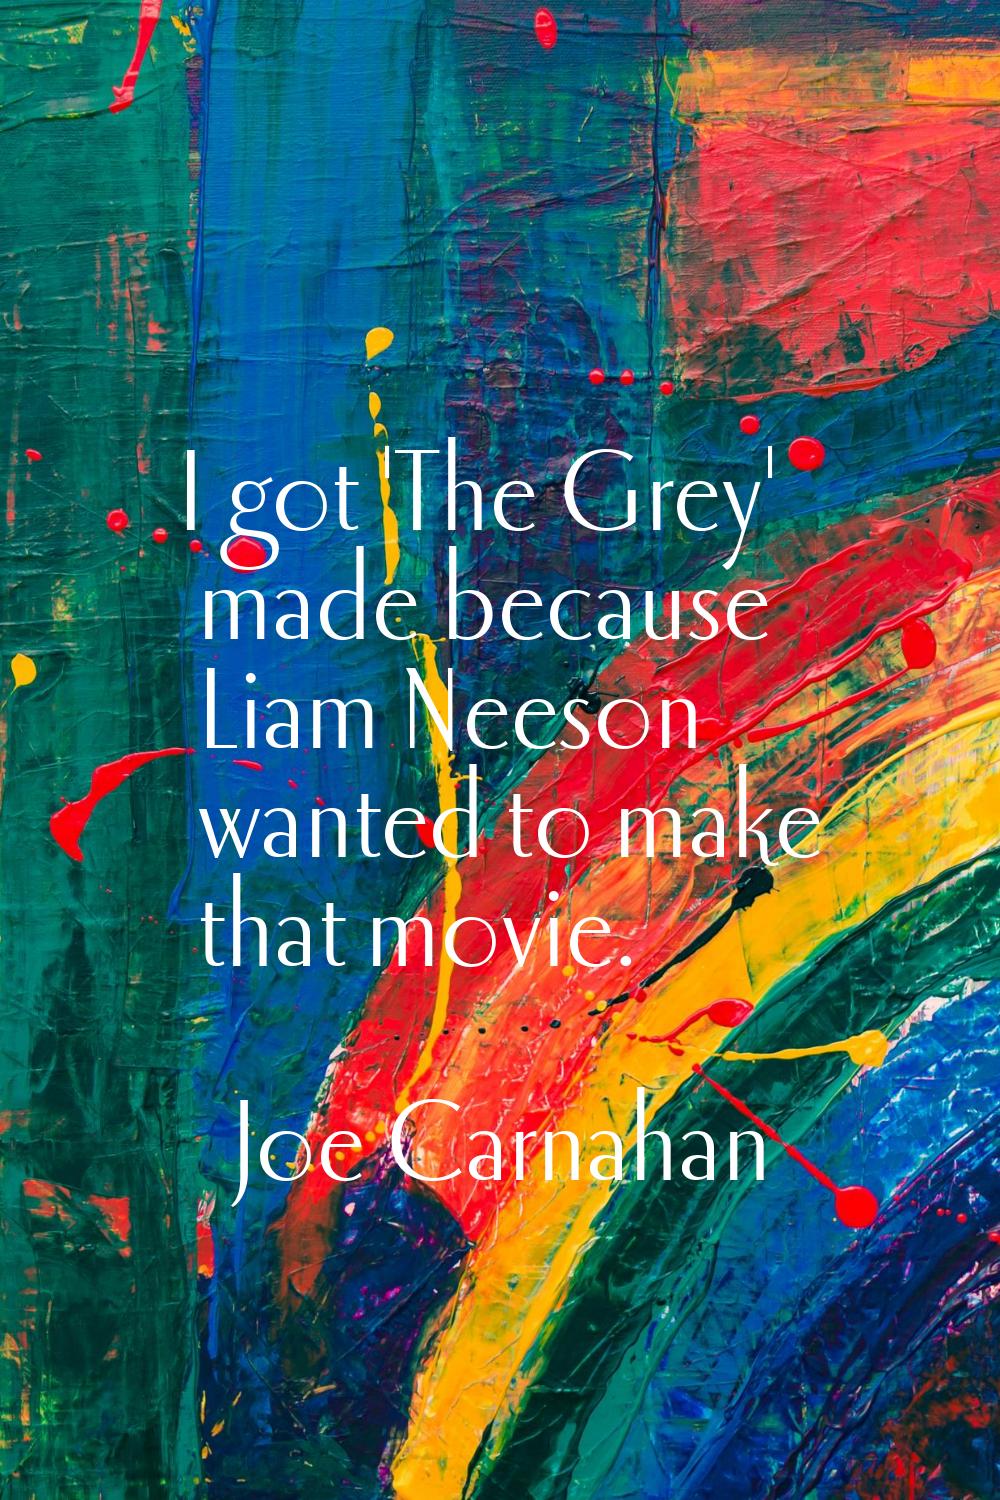 I got 'The Grey' made because Liam Neeson wanted to make that movie.